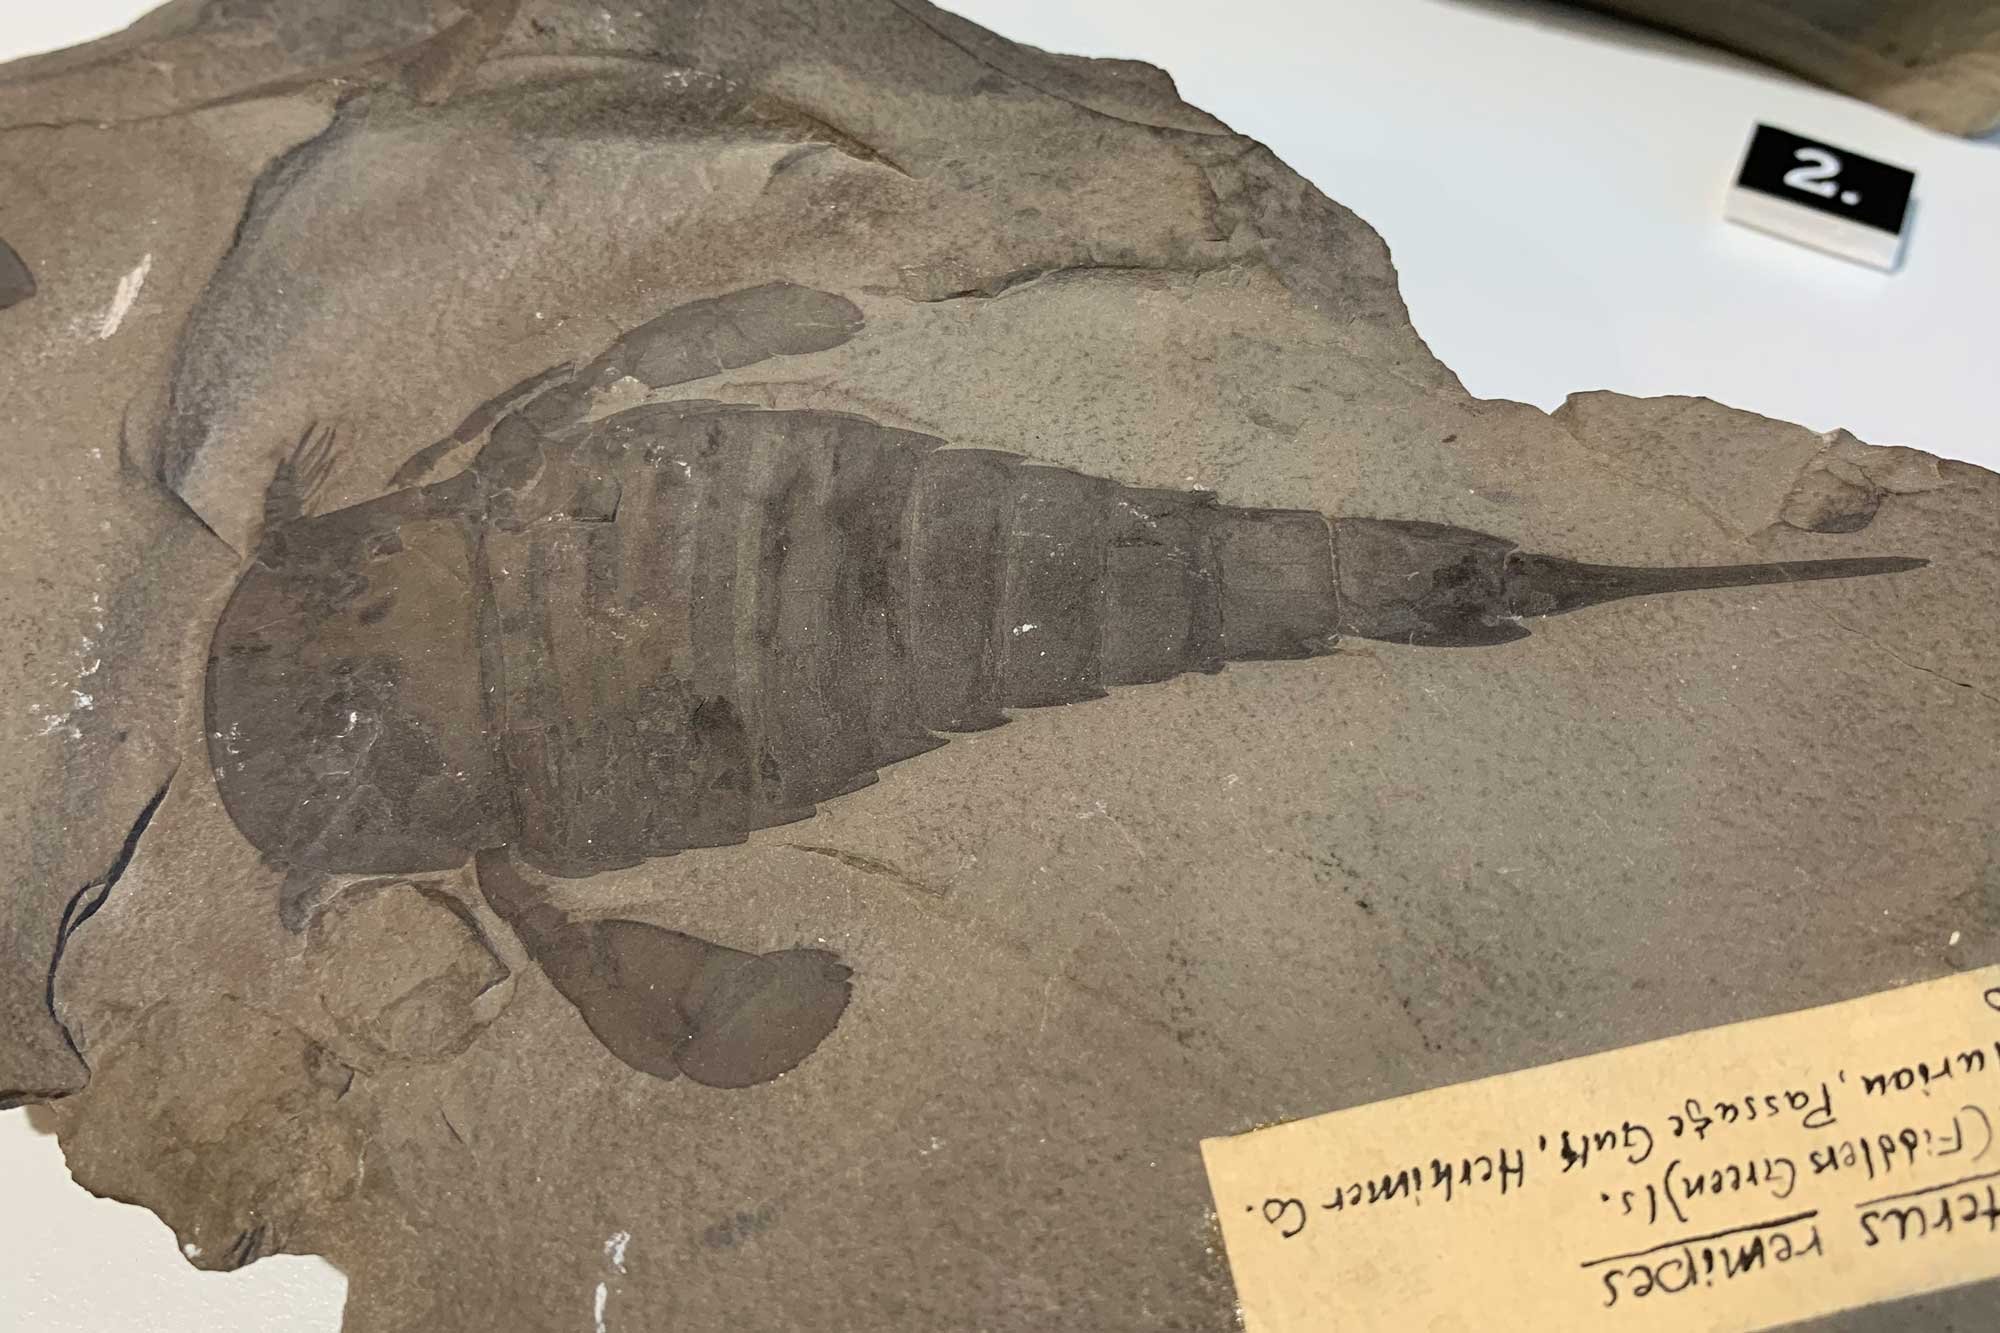 Photograph of a specimen of the sea scorpion Eurypterus remipes from the Silurian of New York.